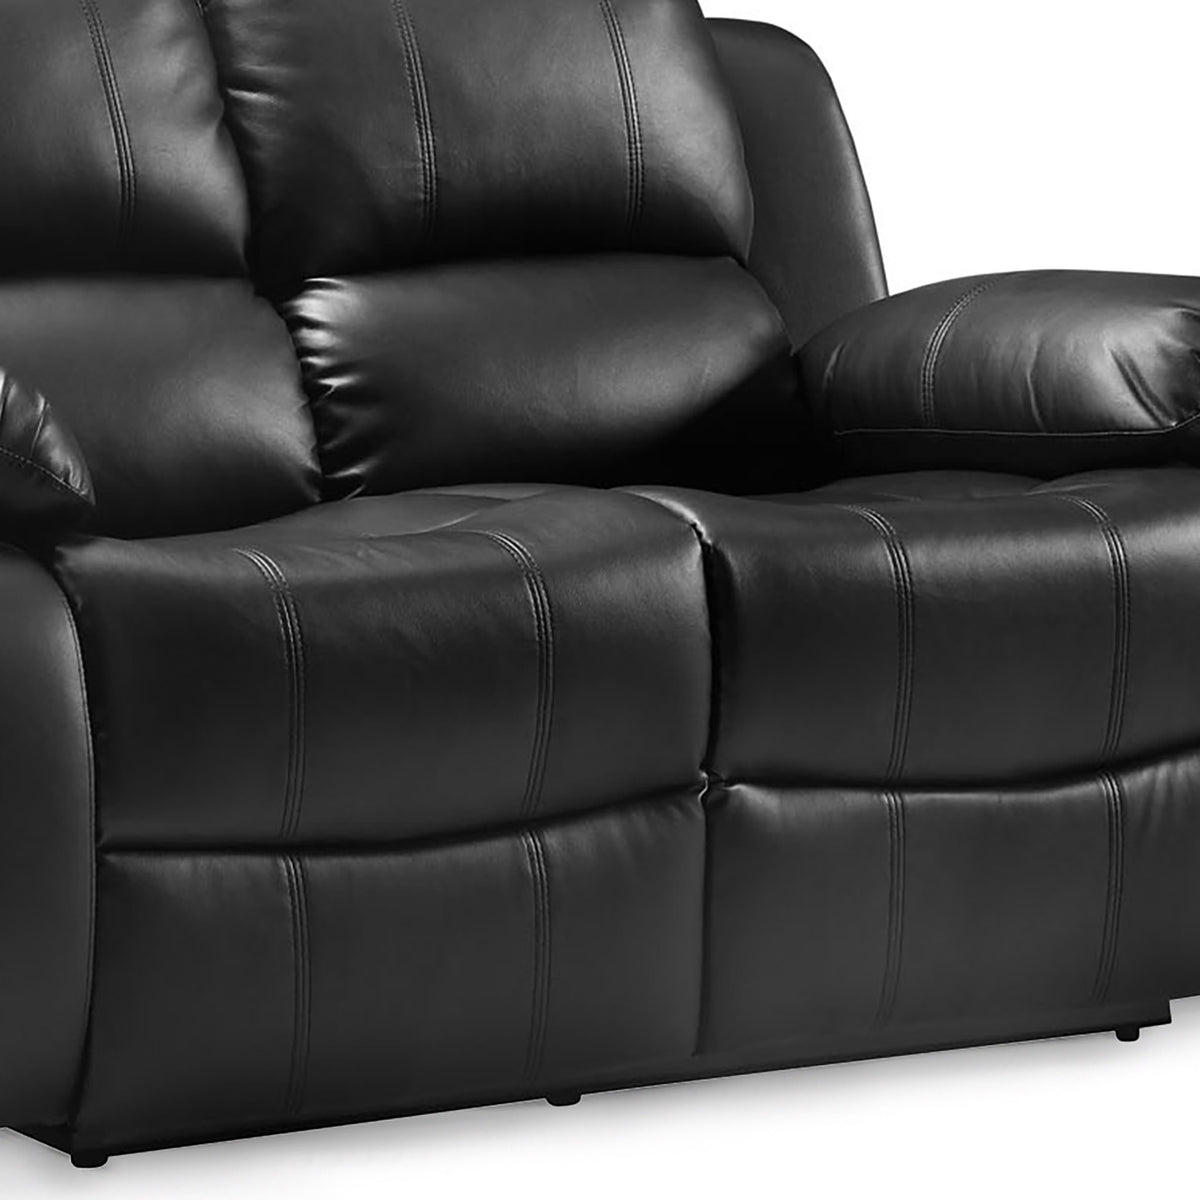 Valencia Black 2 Seater Reclining Air Leather Sofa - Close up of seat